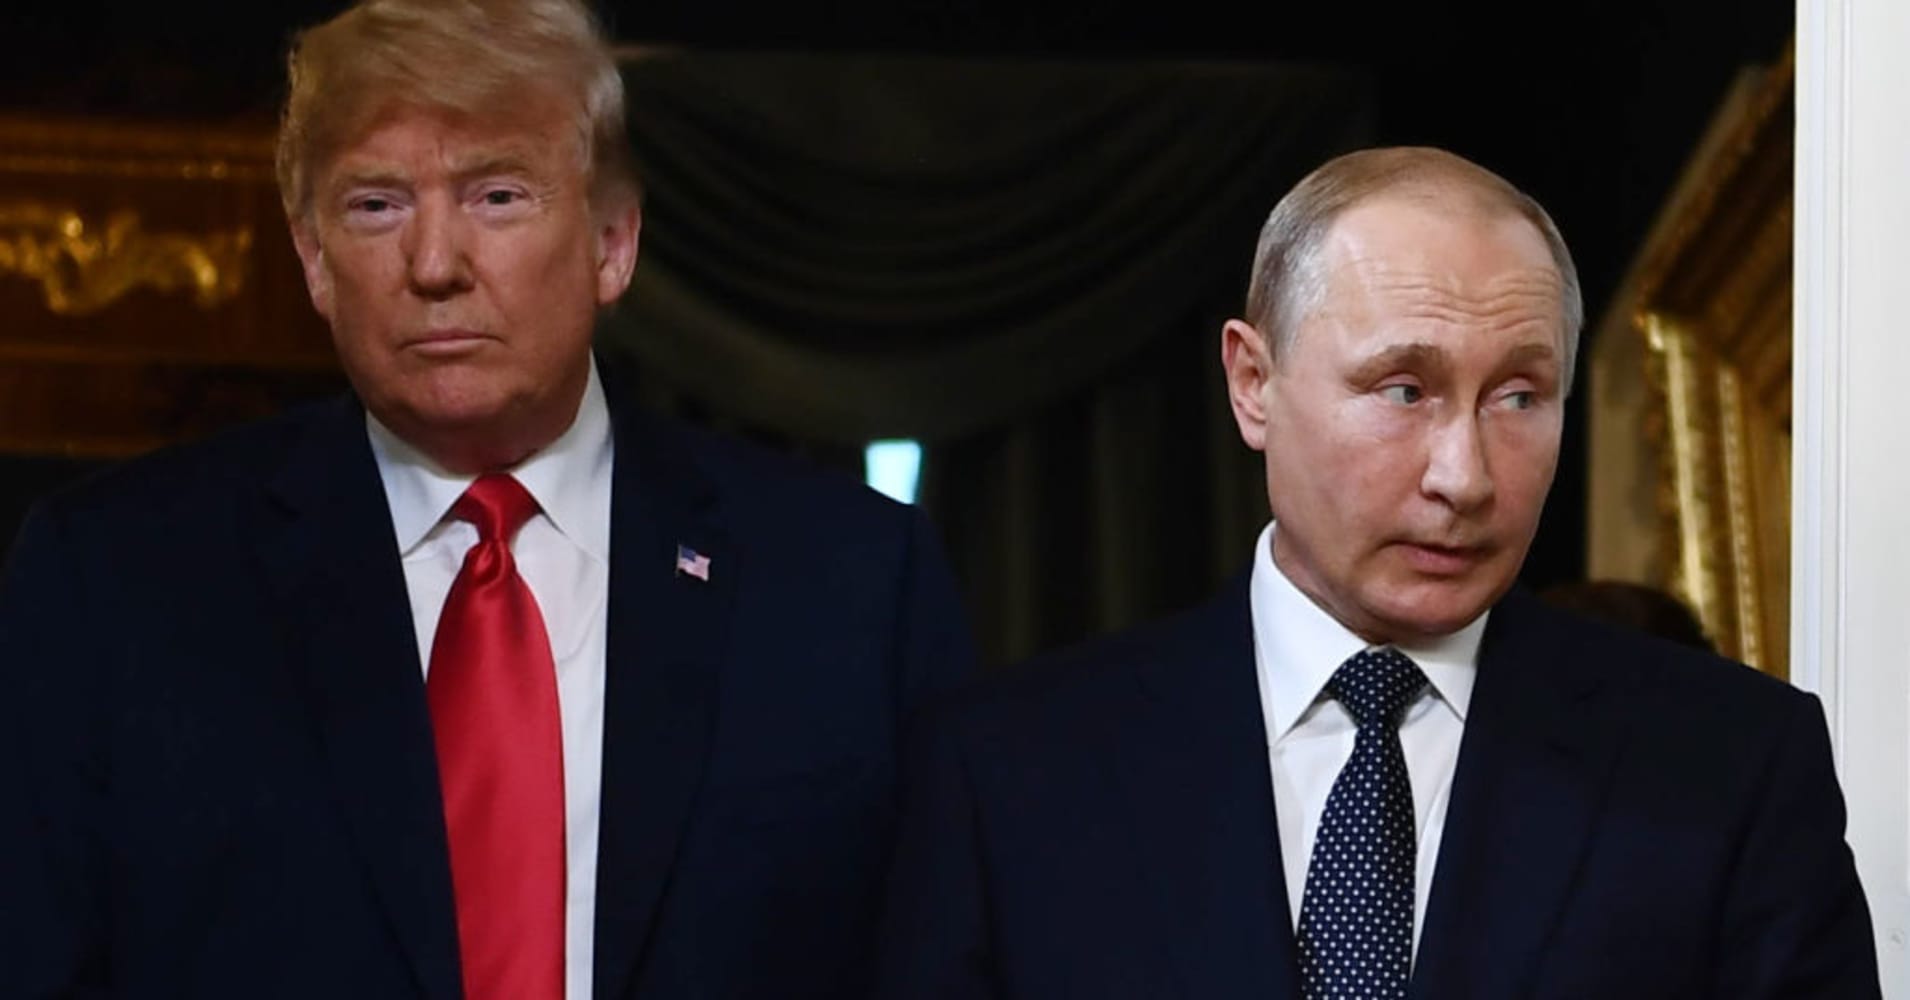 The other big Trump-Putin story: Nuclear treaty hangs in the balance as Russia-US tensions rise